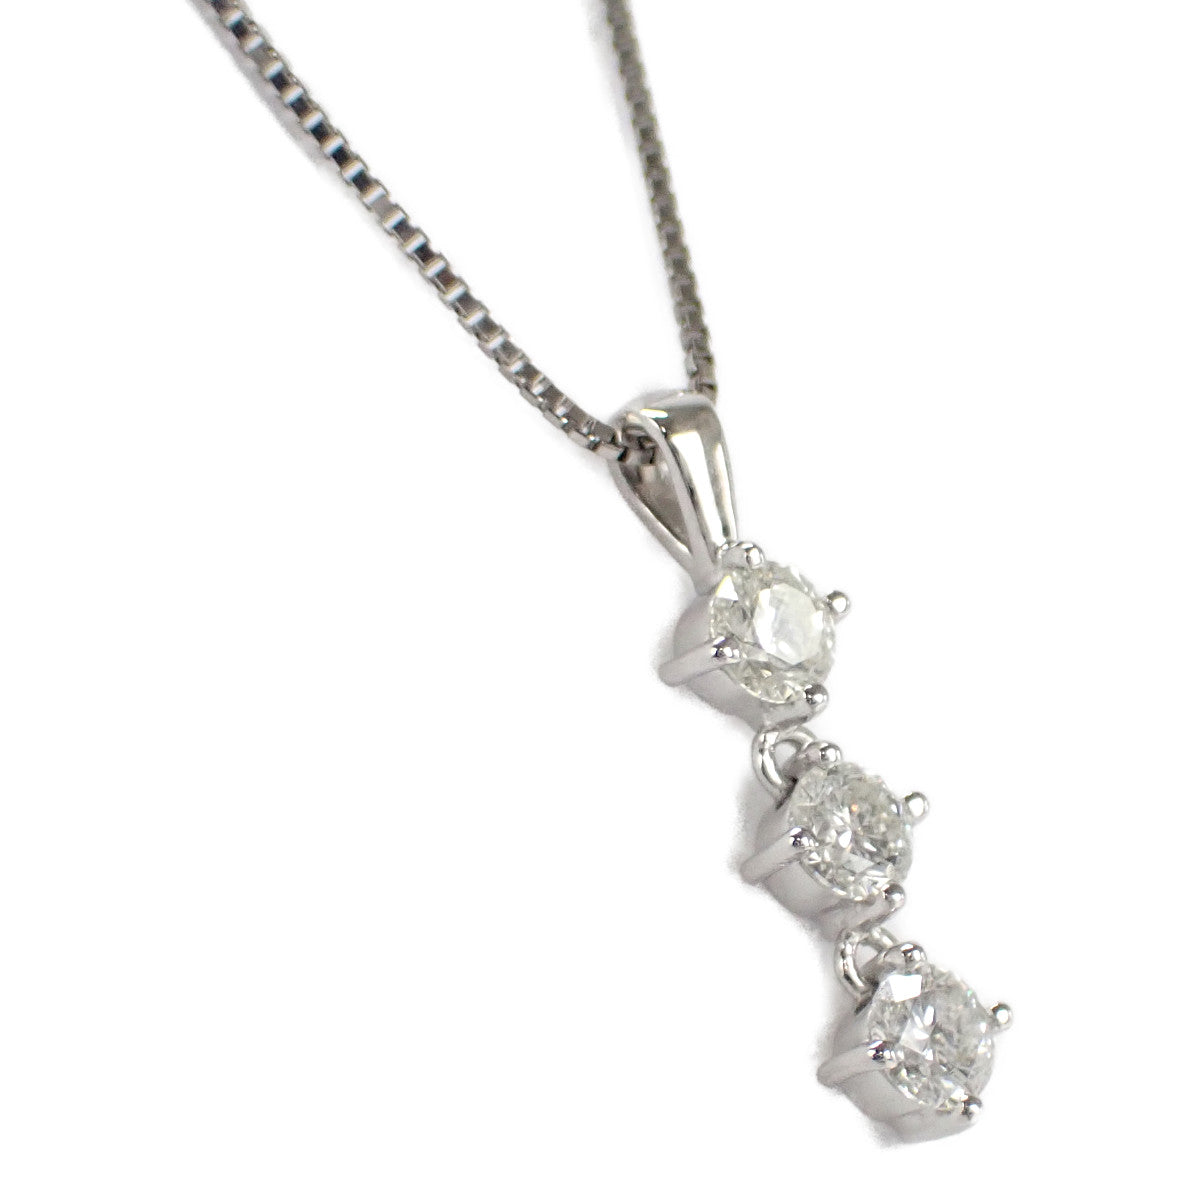 LuxUness  Designer Jewelry Necklace in K18 White Gold with Diamond 0.66ct for Ladies - Silver in Excellent condition